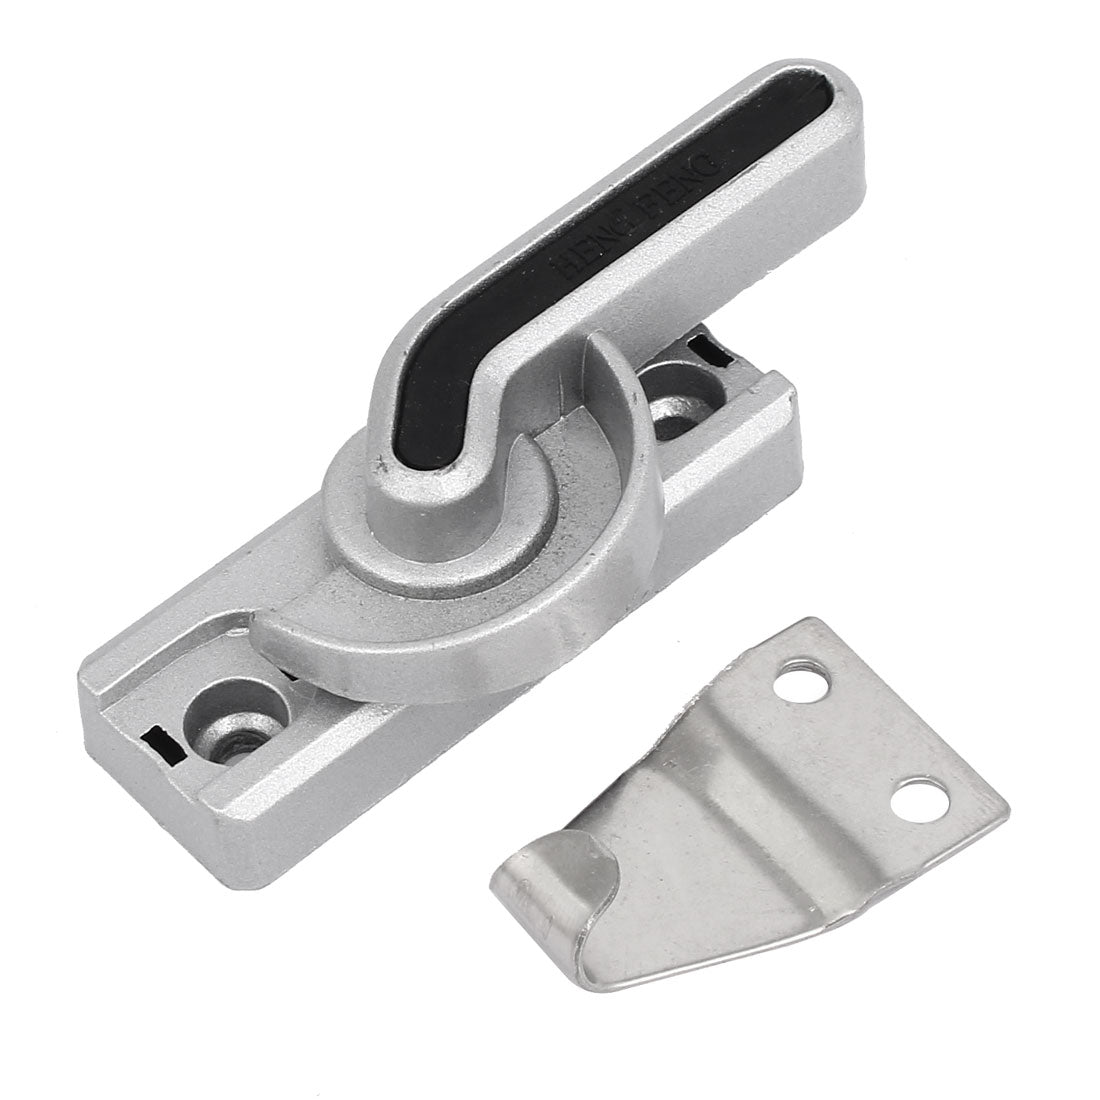 uxcell Uxcell 2pcs Zinc Alloy Cam Action Window Sash Lock Lfte Hand for Sliding Window